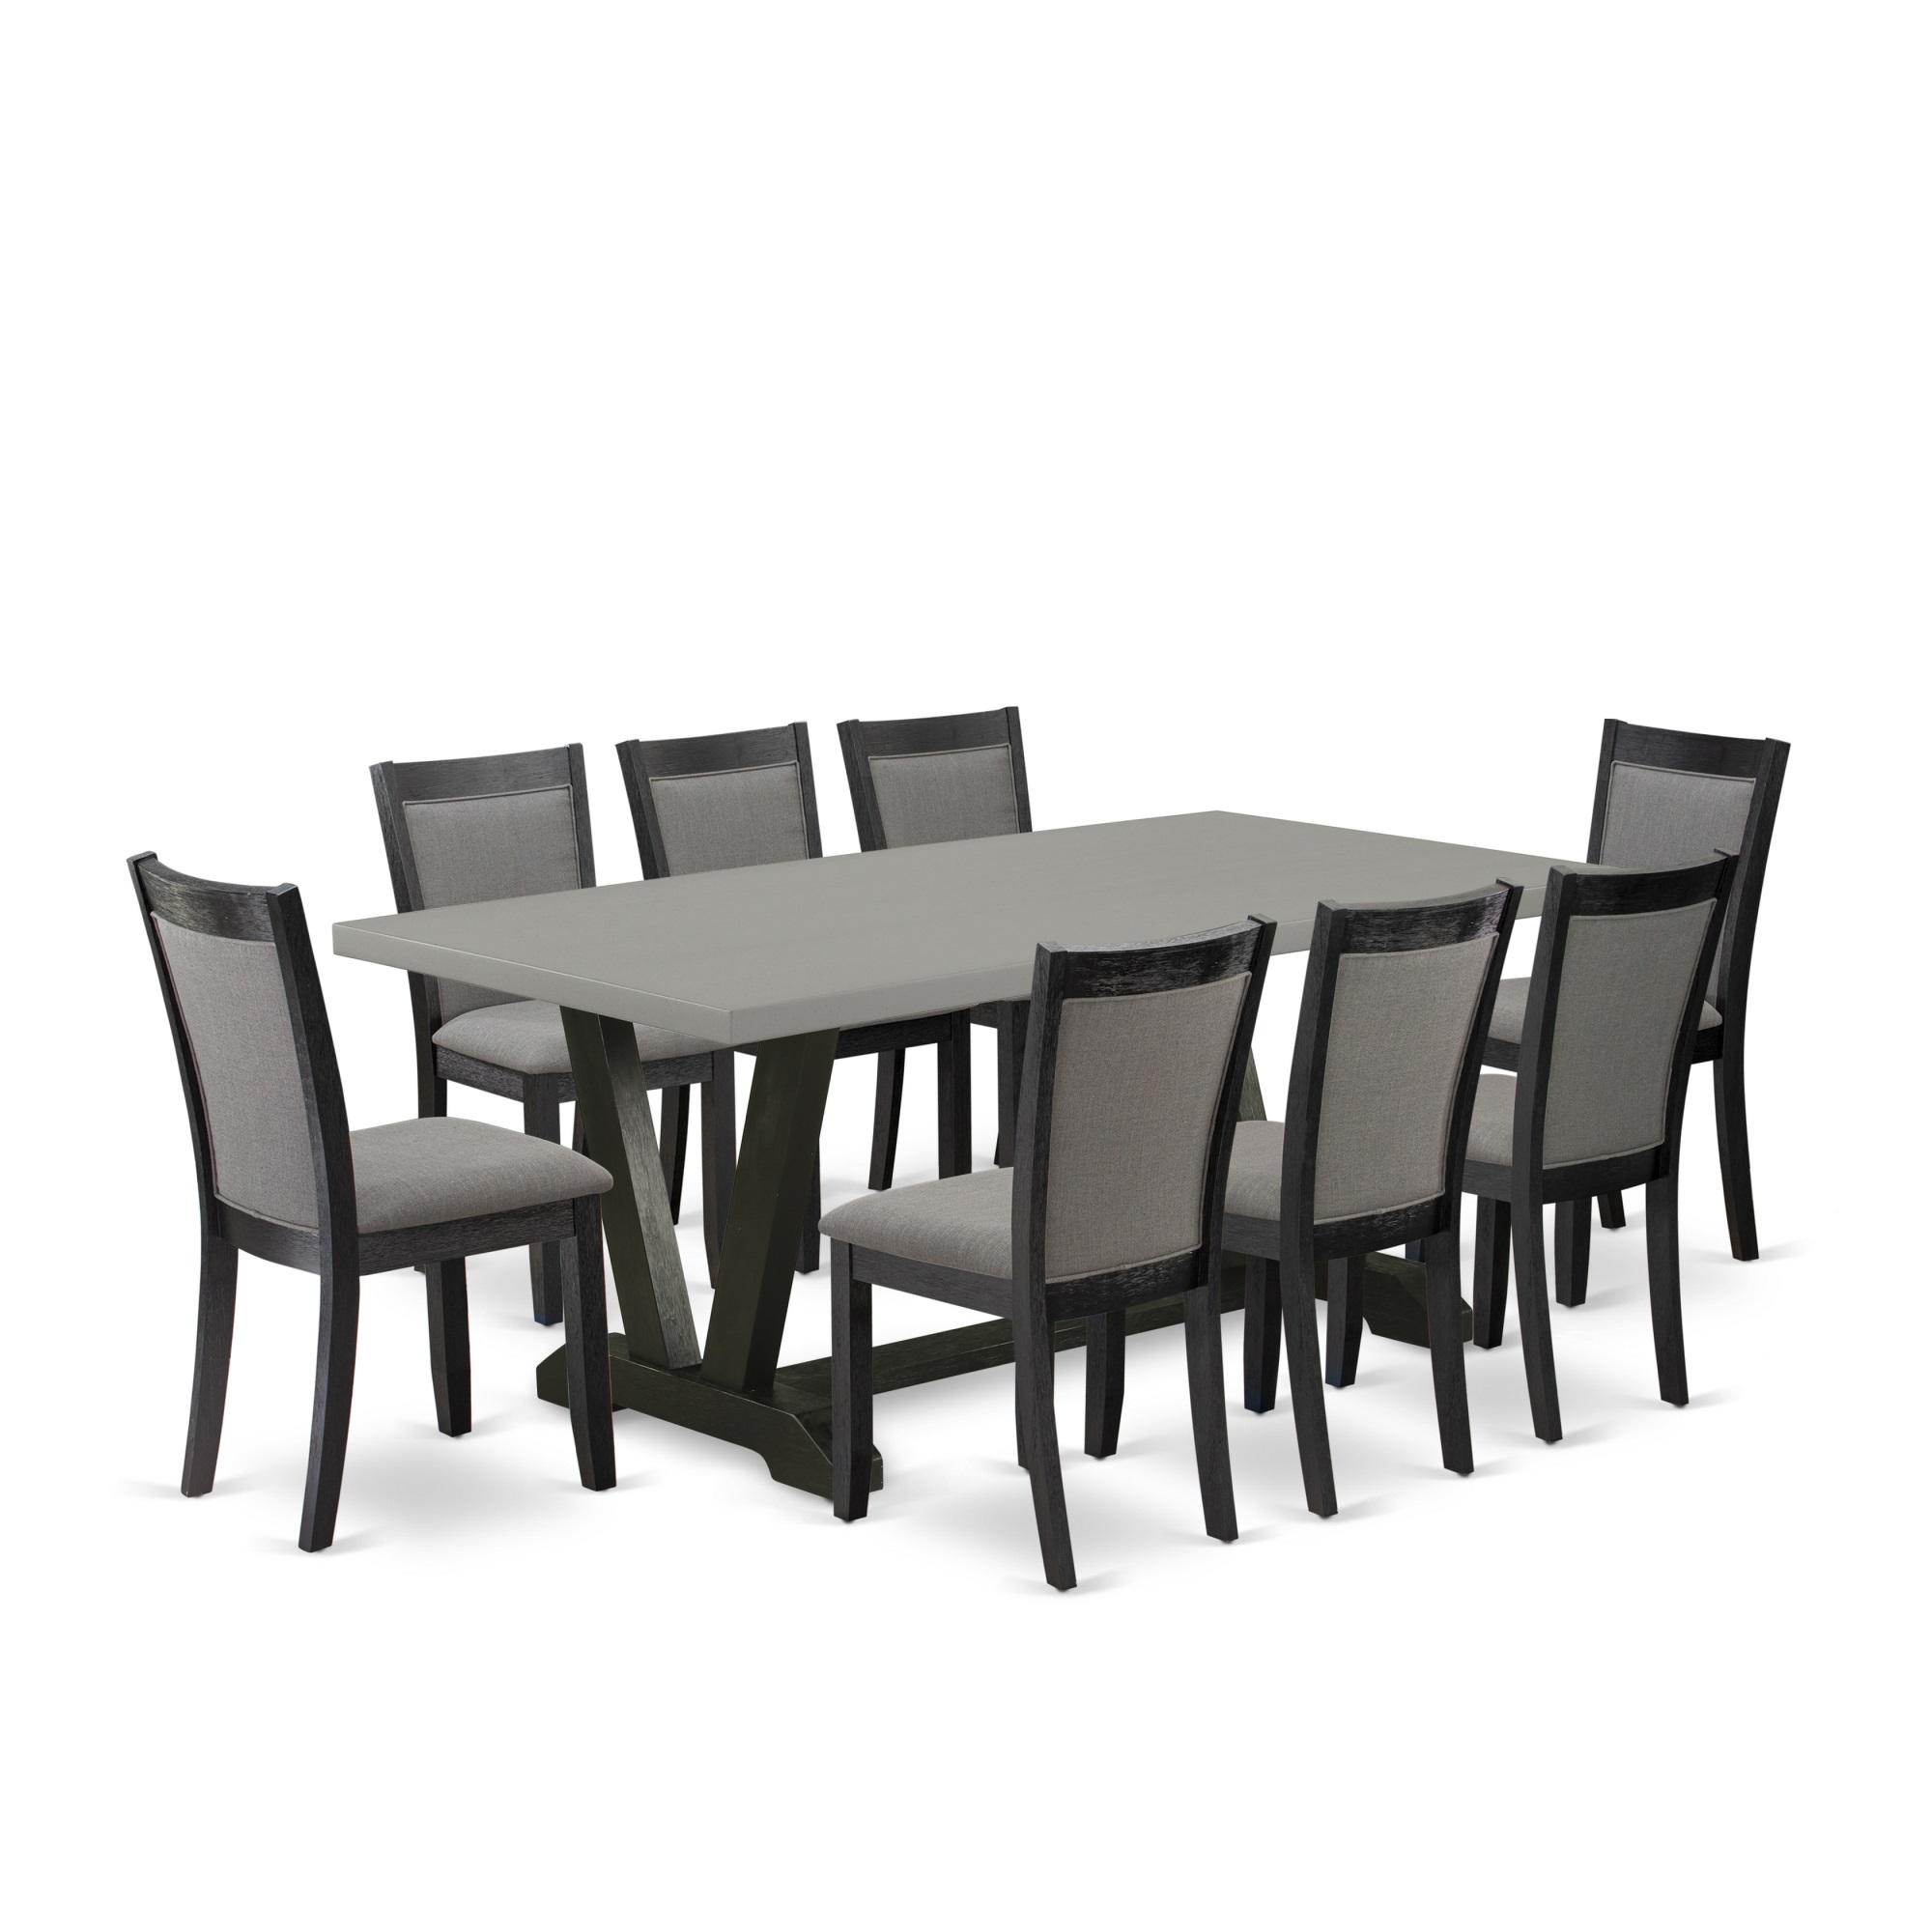 East West Furniture V697MZ650-9 9Pc Kitchen Set - Rectangular Table and 8 Parson Chairs - Multi-Color Color